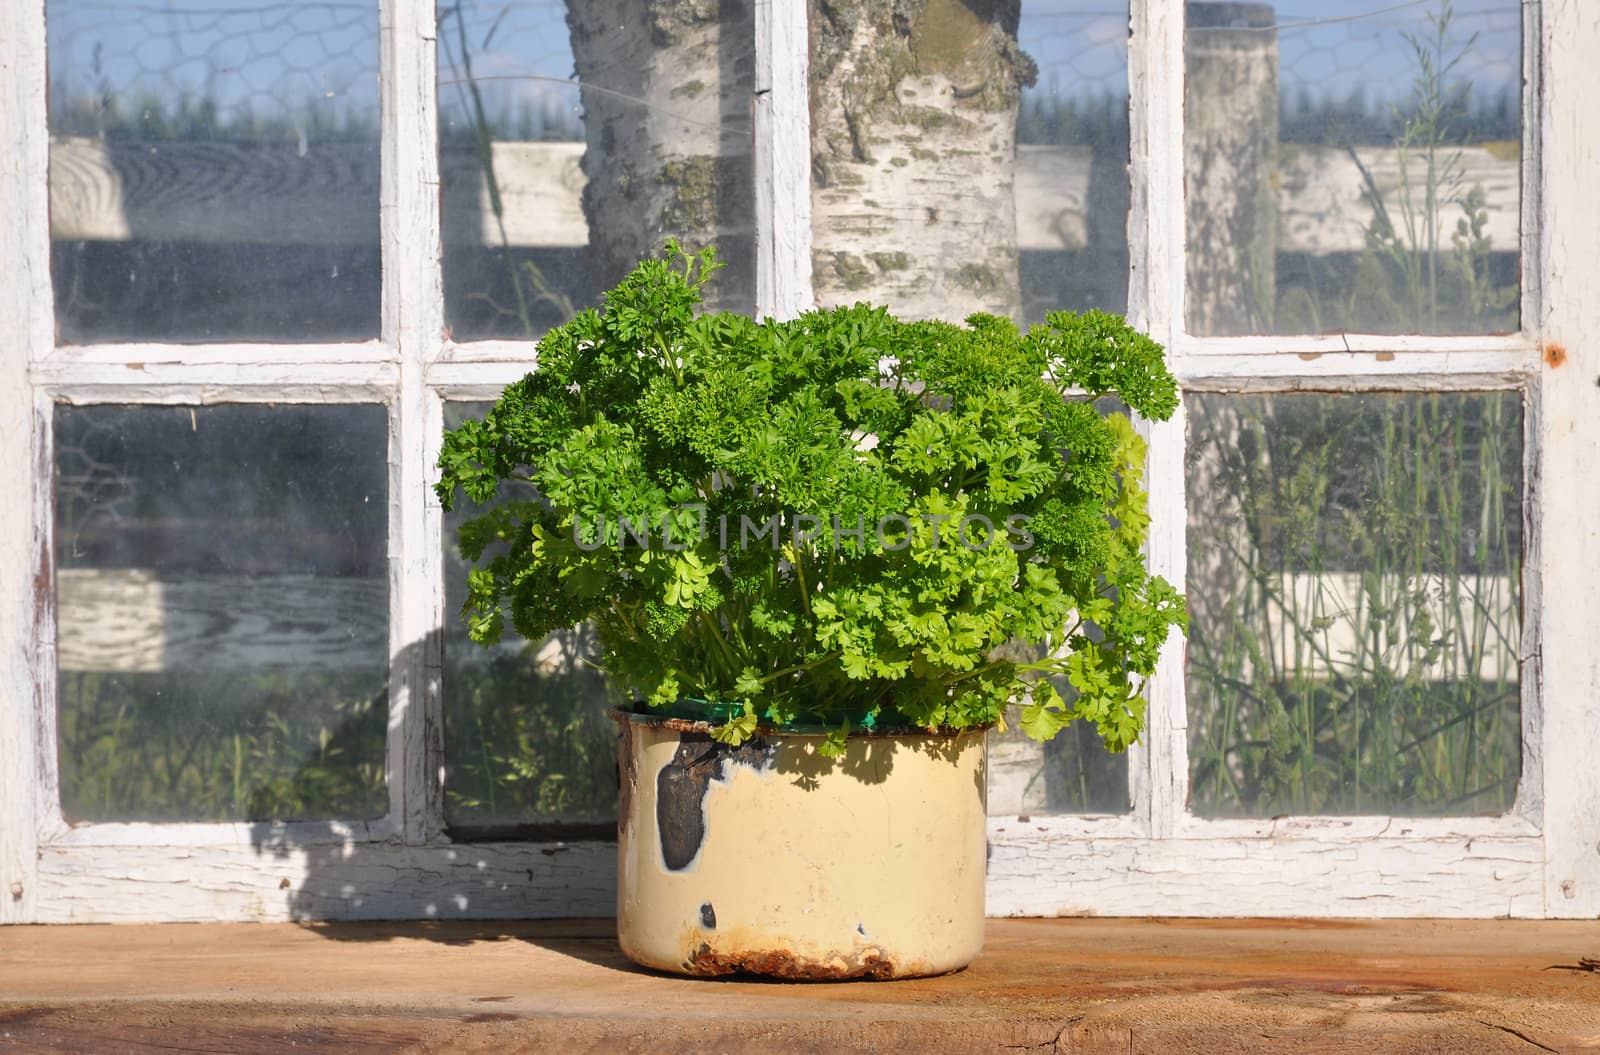 Parsley in a enamel pot in a homemade greenhouse.